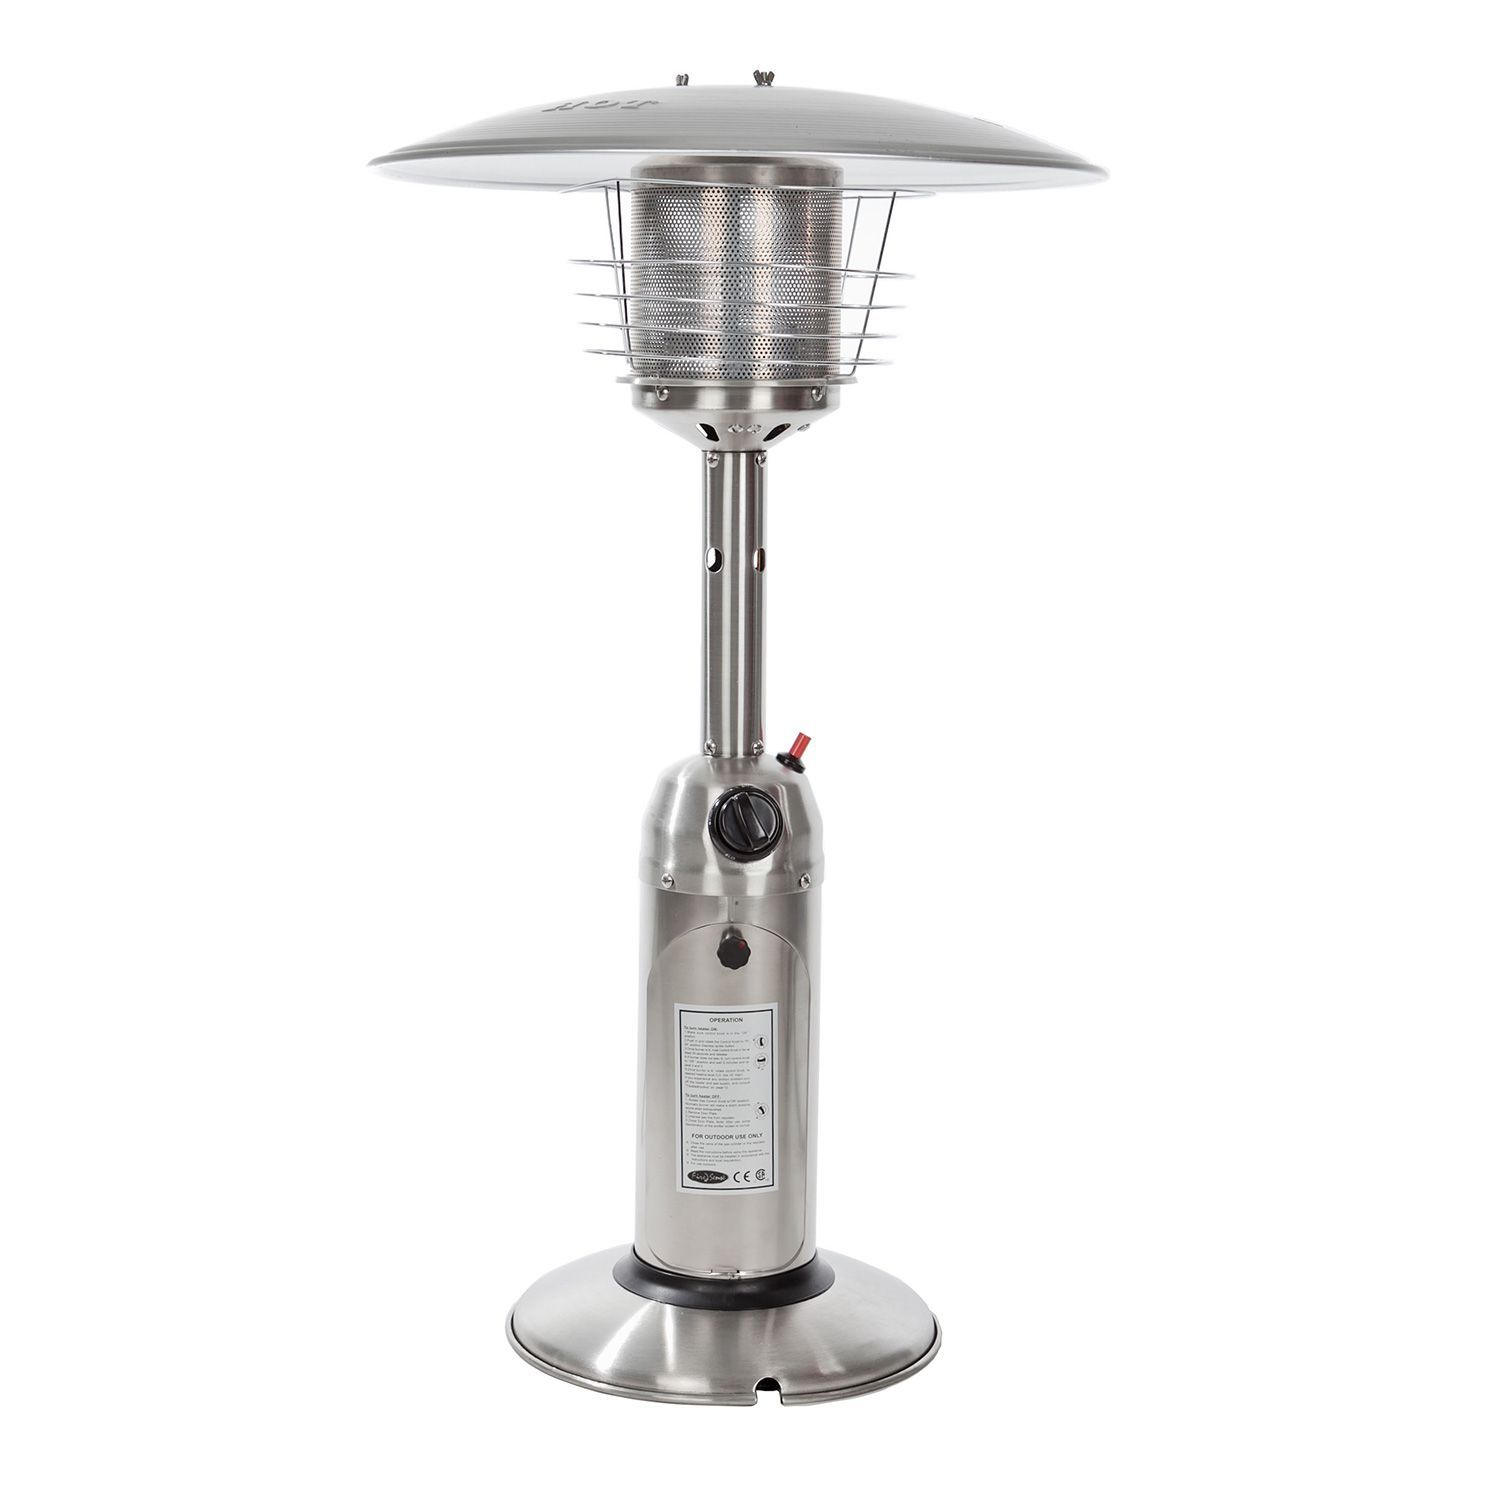 Stainless Steel Table Top Patio Heater Party Ideas within sizing 1500 X 1500